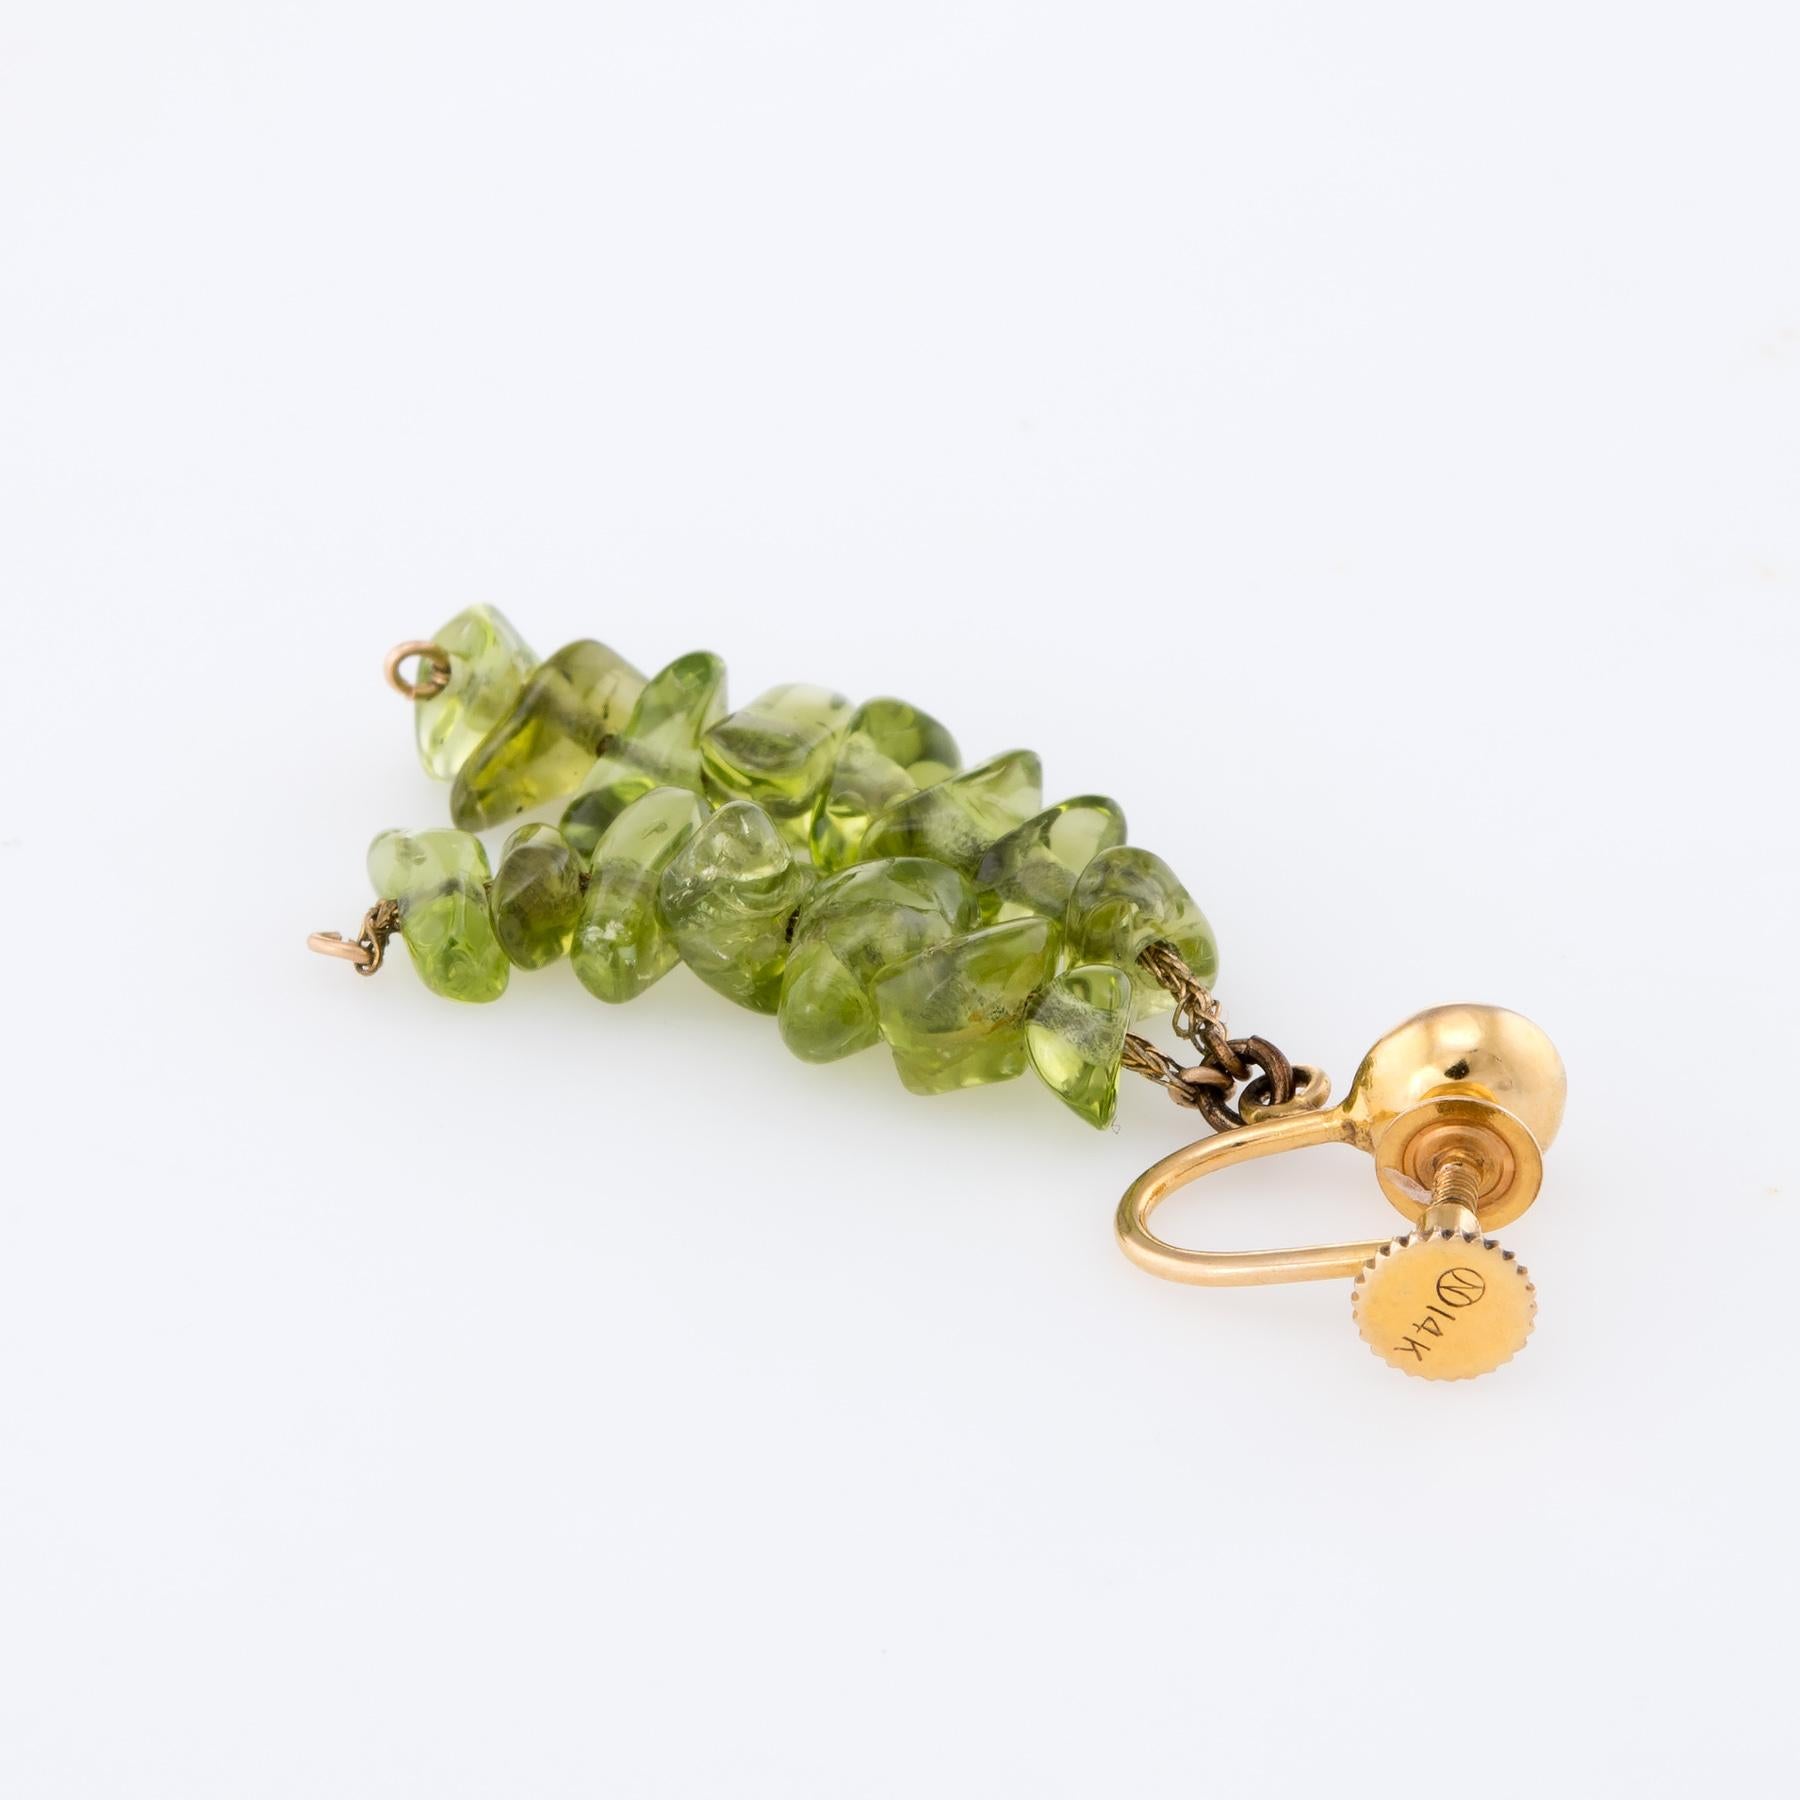 Elegant pair of vintage peridot drop earrings, crafted in 14k yellow gold (circa 1960s to 1970s)

Freeform natural peridot is polished smooth. The peridot ranges in size from 8mm x 4mm (average).  

The peridot is freeform in shape and tumbled for a